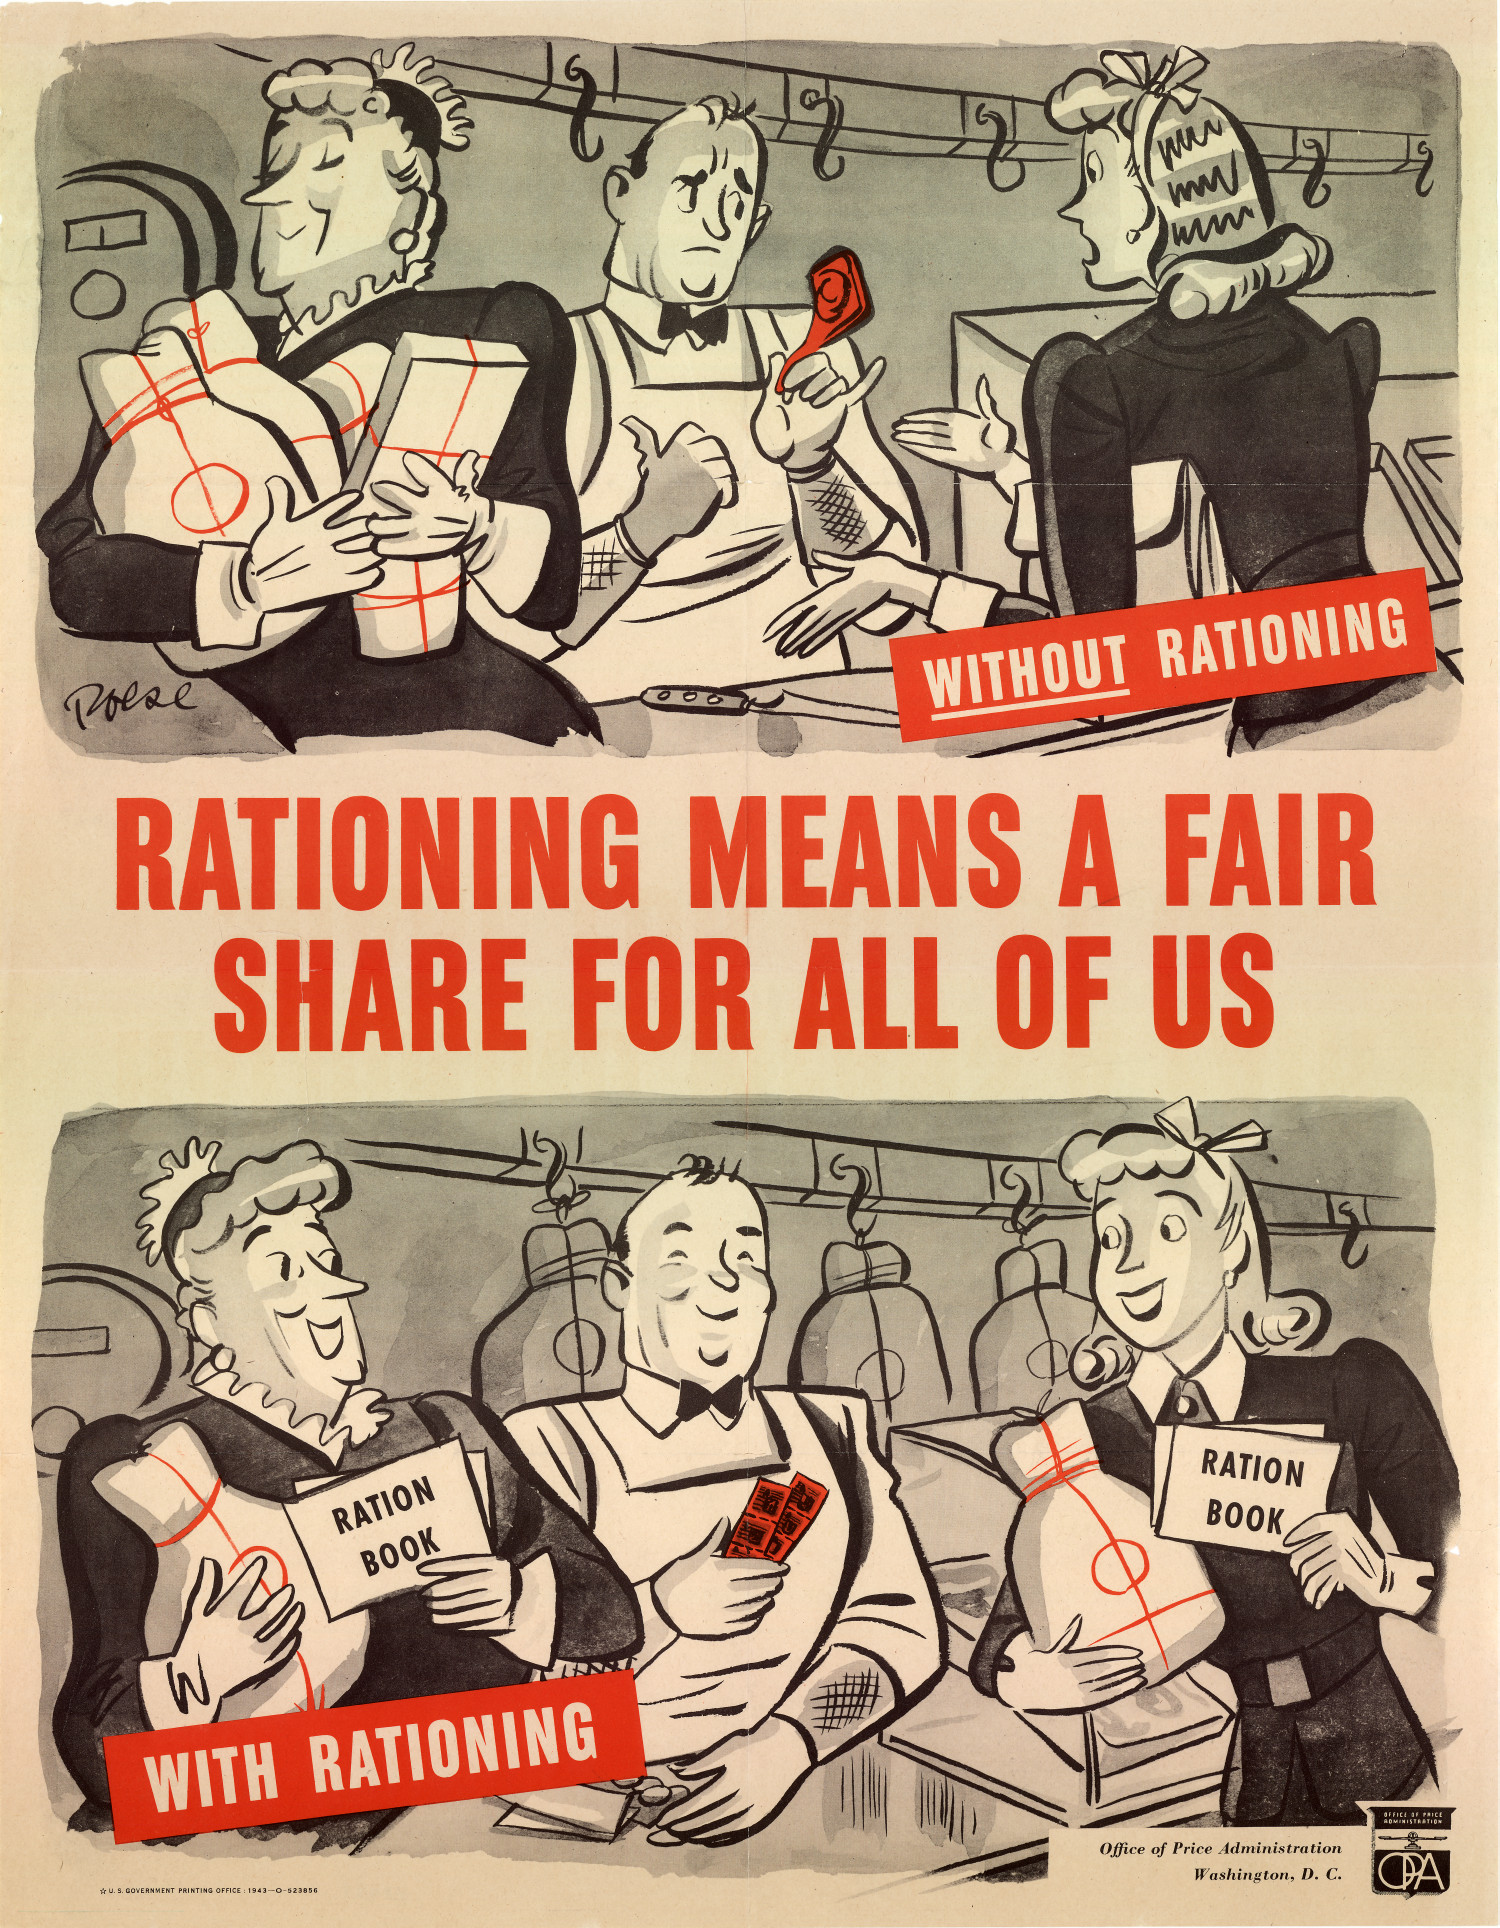 poster: "rationing means a fair share for all of us"